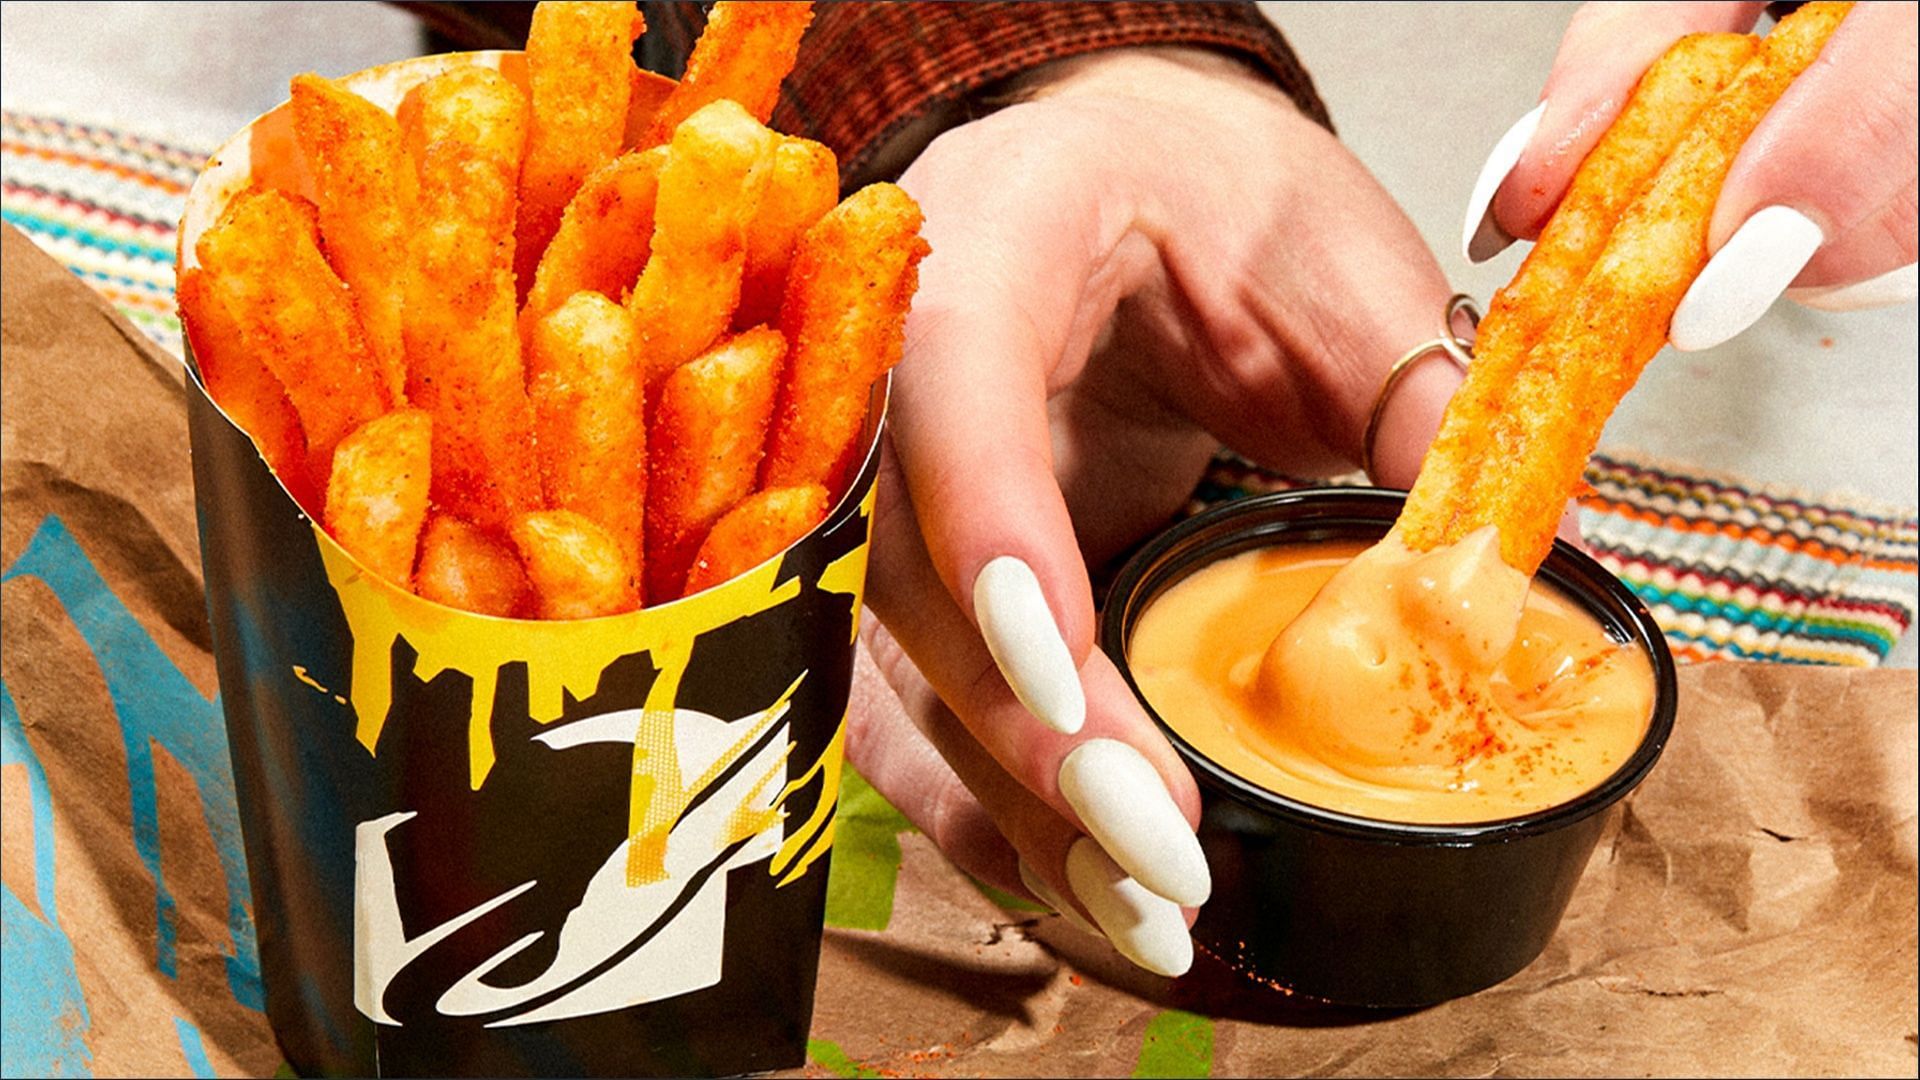 The new Nacho Fries with Vegan Cheese Sauce is certified to be Vegan by the American Vegan Association (Image via T. Bell)